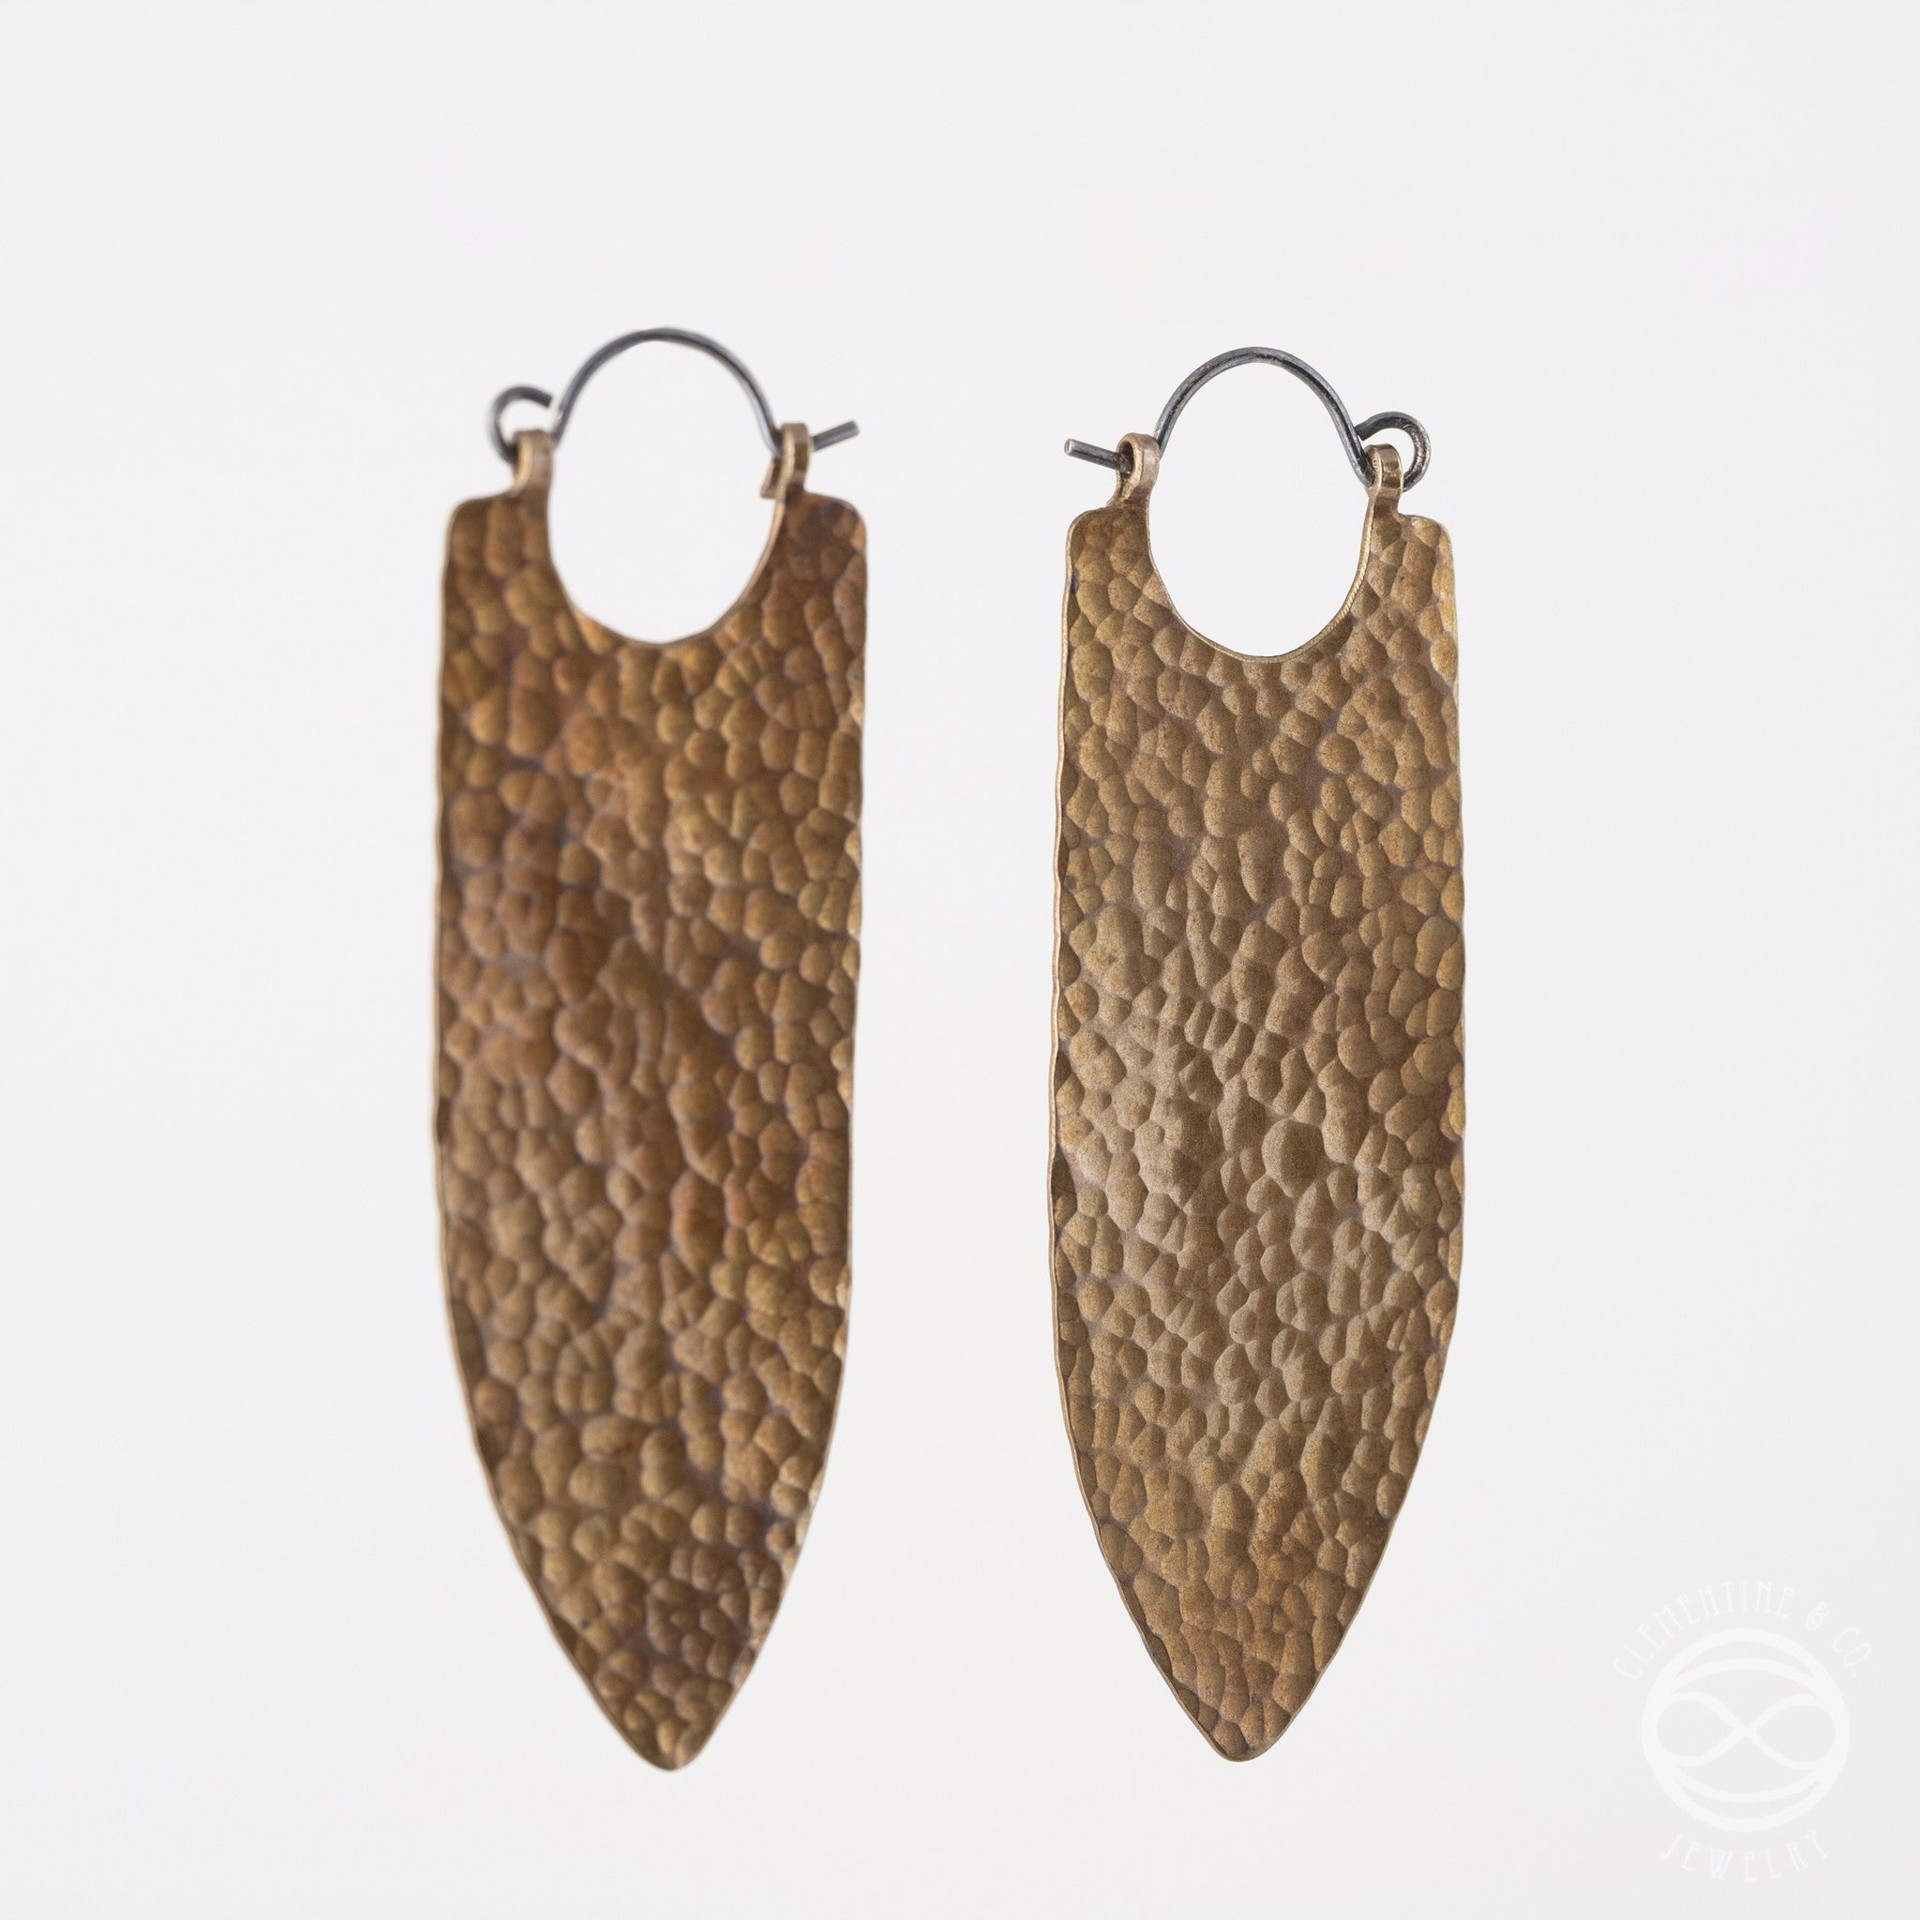 Banner Earrings in Silver by Clementine & Co. Jewelry